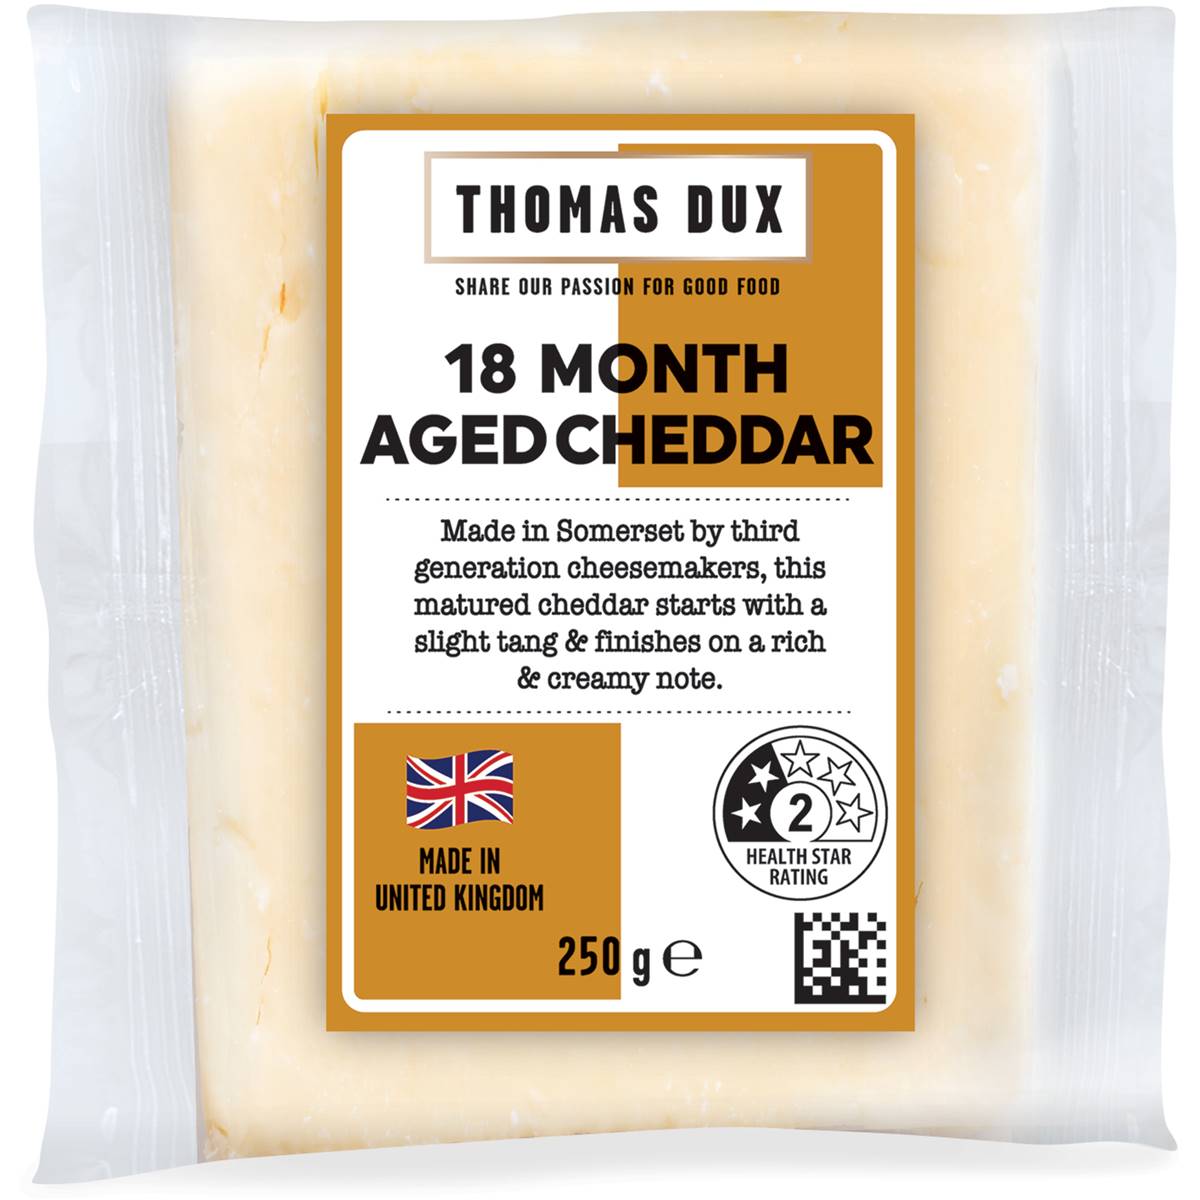 Calories in Thomas Dux Aged Cheddar 18 Months